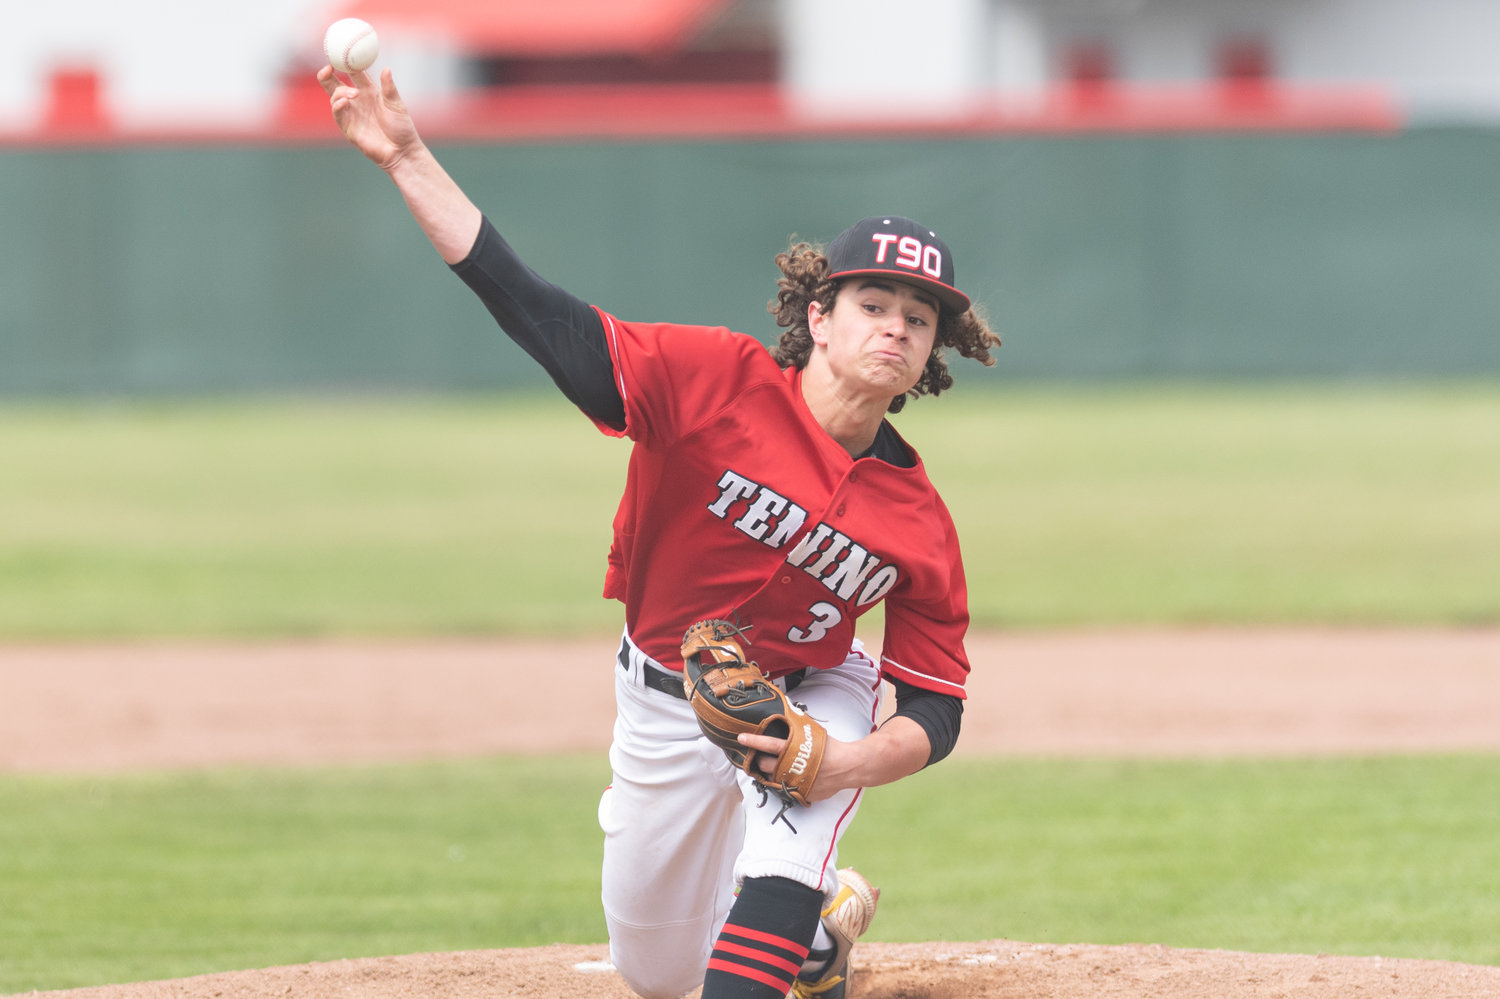 Tenino's Easton Snider throws a pitch against Montesano May 3.